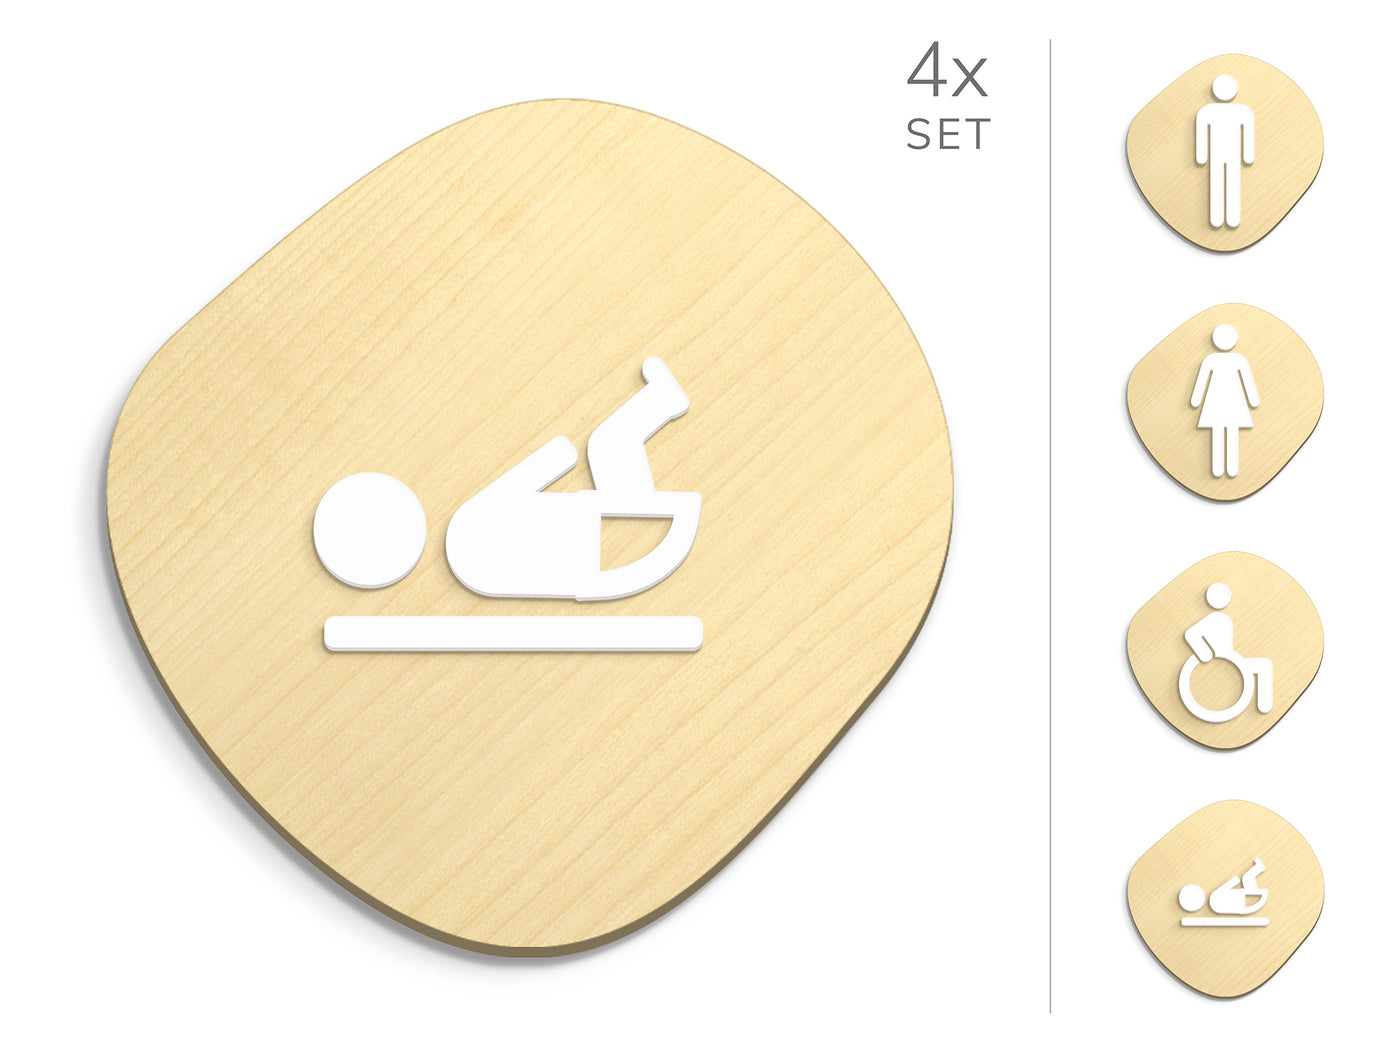 Classic, 4x Stone shaped Base - Restroom Signs Set - Man, Woman, Disabled, Changing table